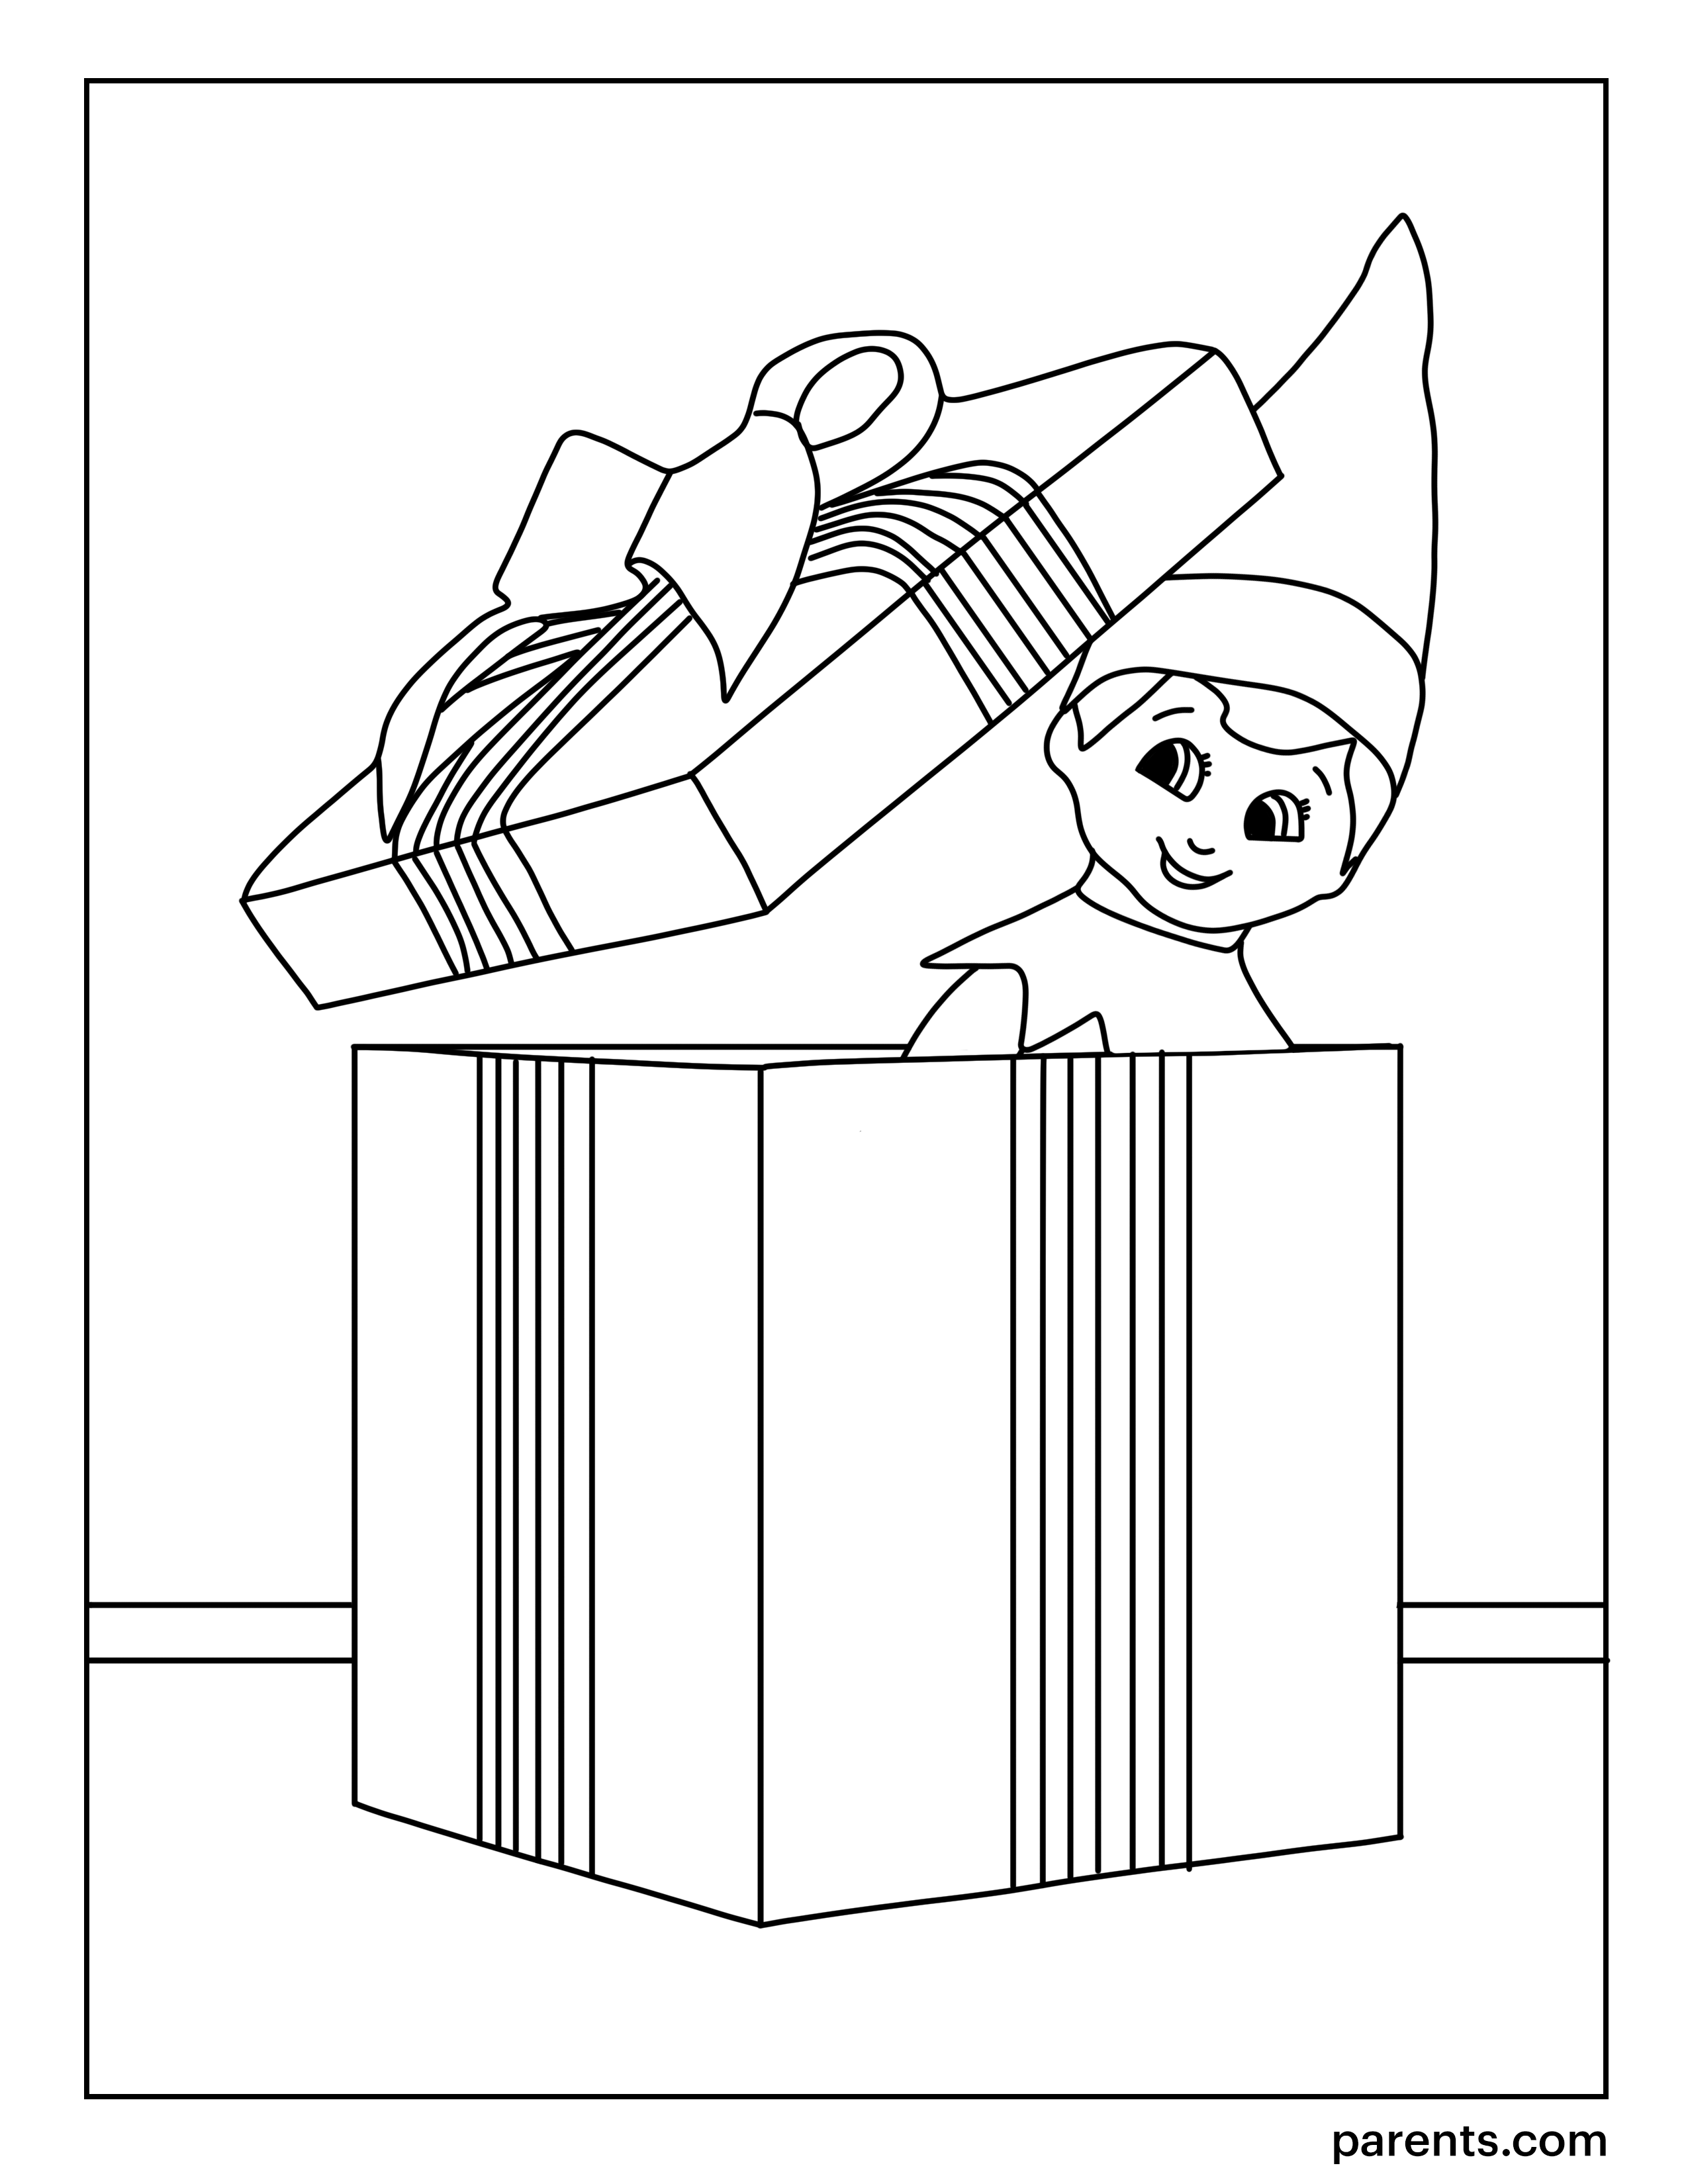 7 Elf on the Shelf Inspired Coloring Pages to Get Kids Excited for  Christmas | Parents